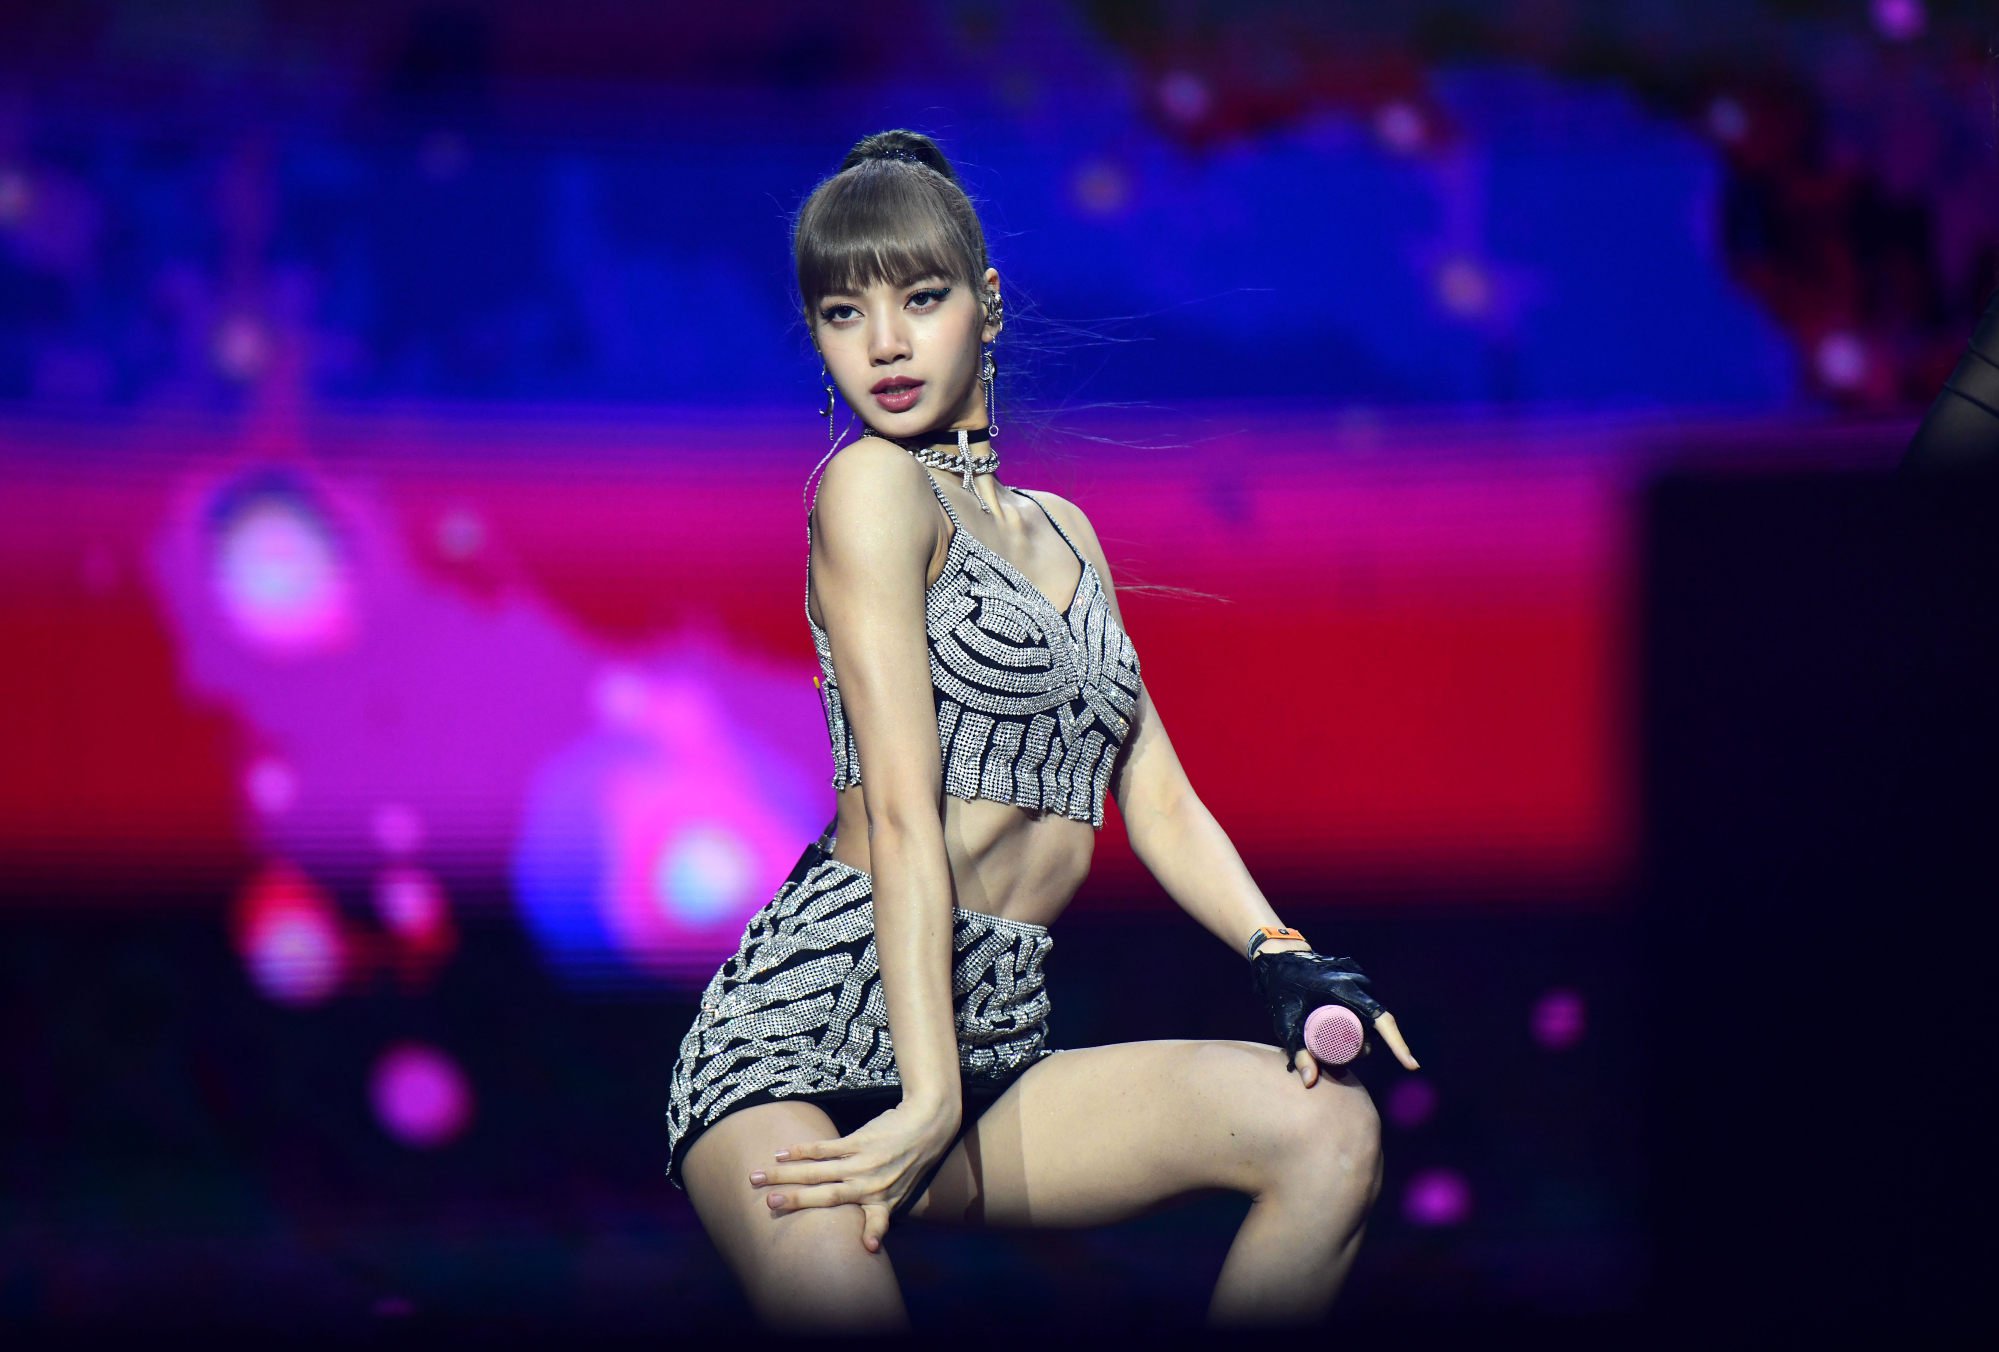 TAKE A LOOK AT HOW BLACKPINK'S LISA STYLED THIS CELINE BRA - Time